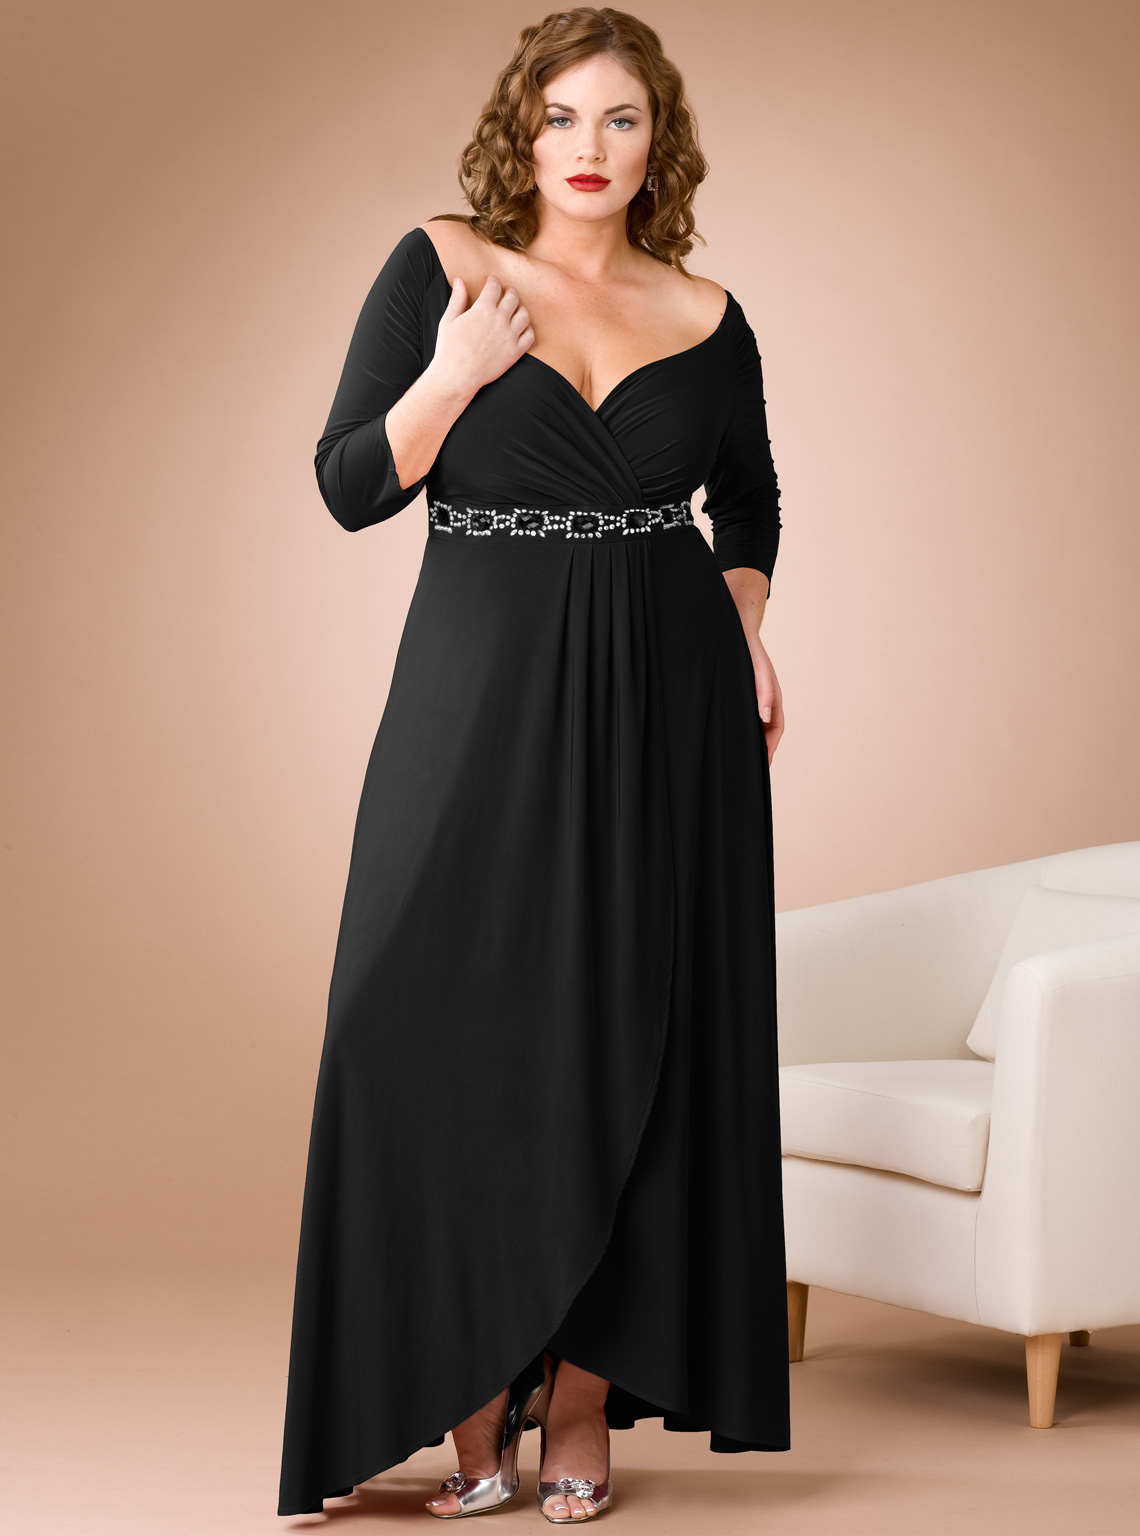 Download this Cocktail Party Dresses Plus Size Women Clothing picture